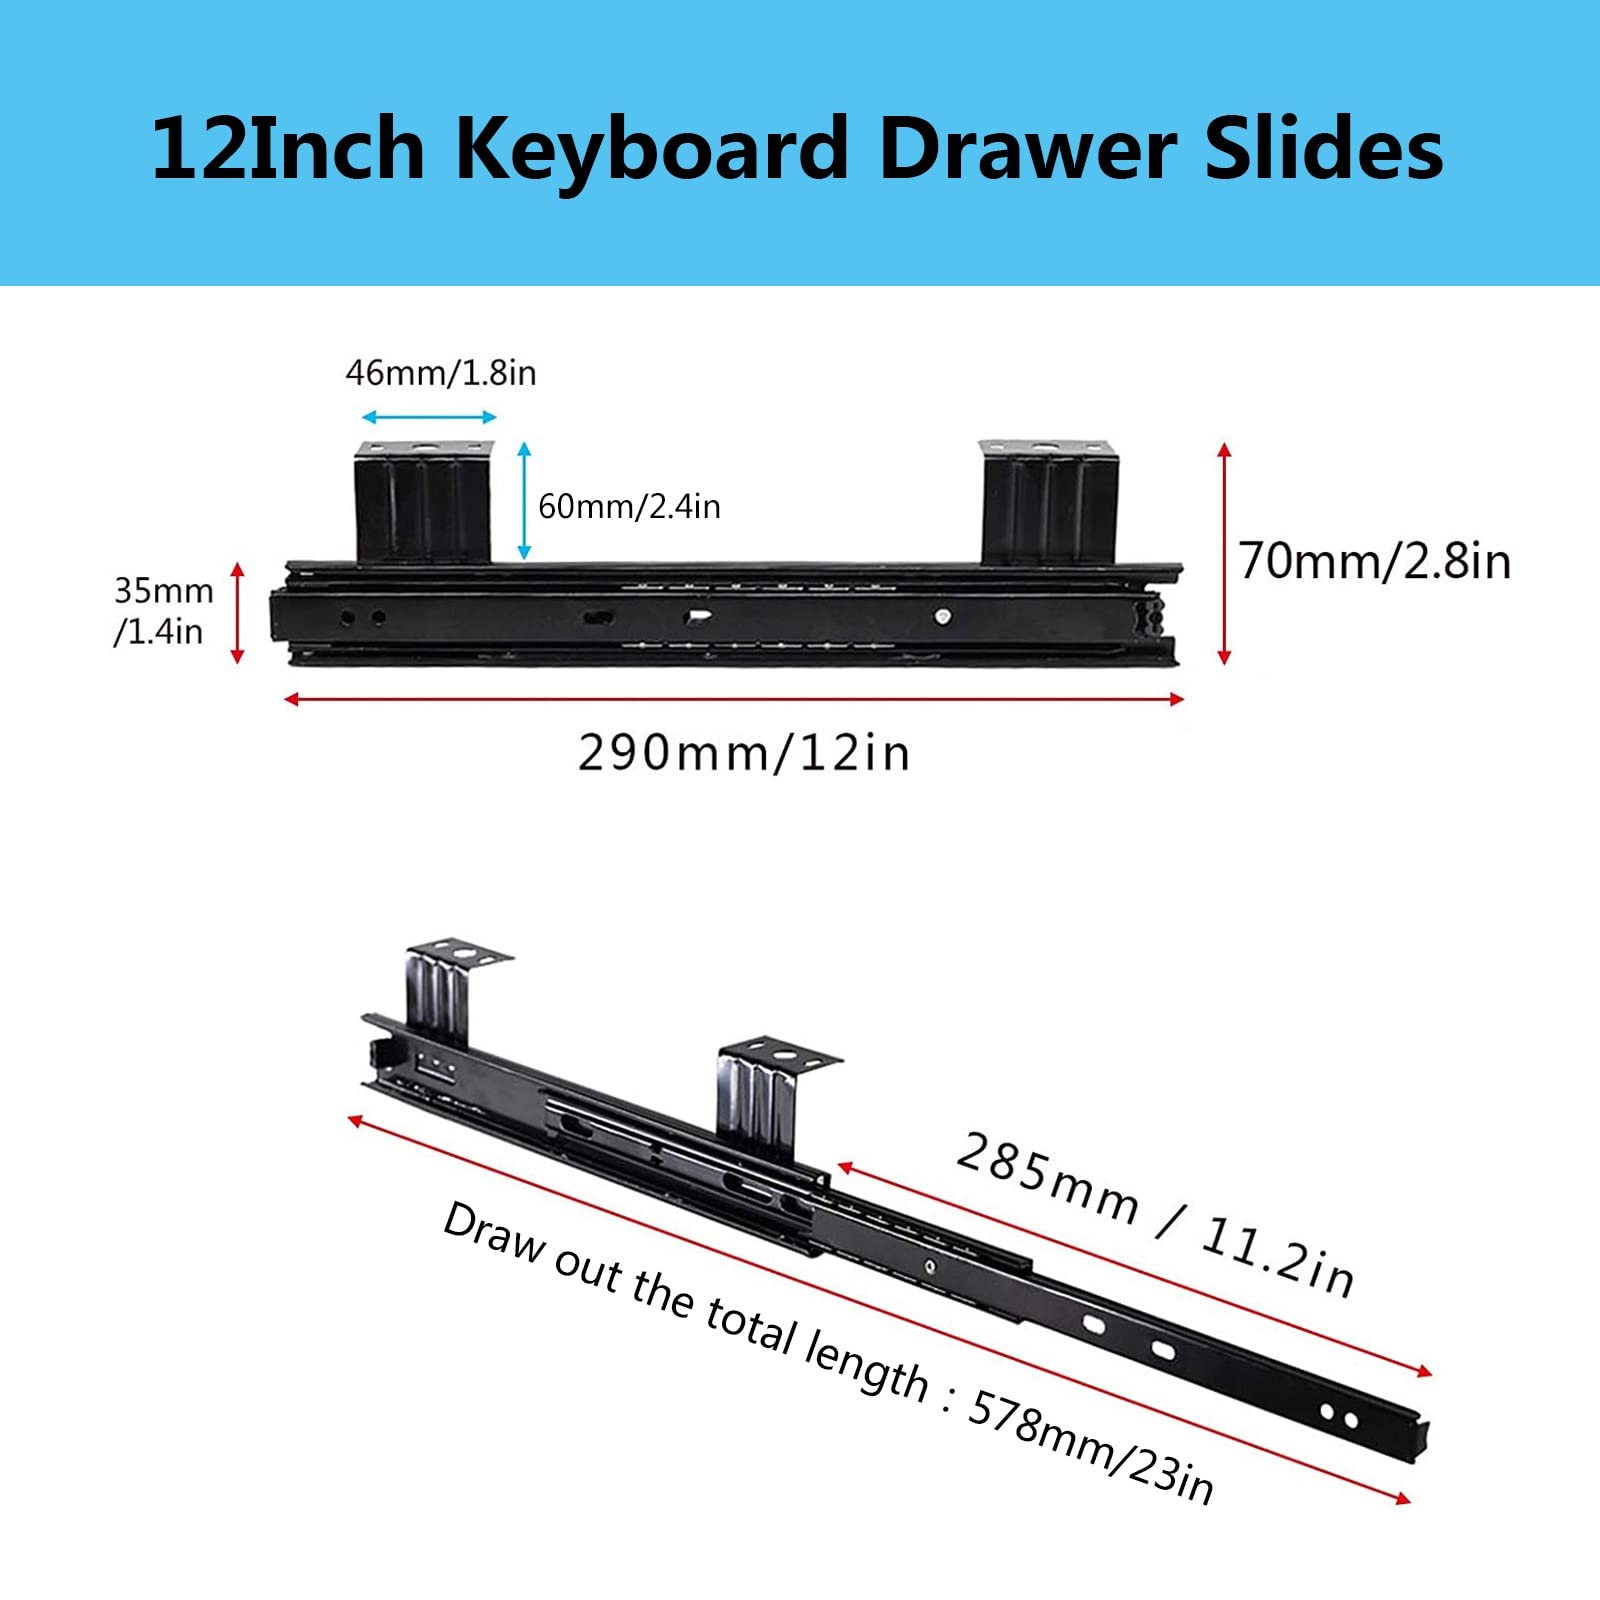 2 Pcs Heavy Duty Ball Bearing Slides Under Desk Keyboard Tray Runners 12inch - with Screws - Hanging Mount, 3-Sections Extension Rails Computer Slides Keyboard Drawer Slides (Black 290mm(12inch))